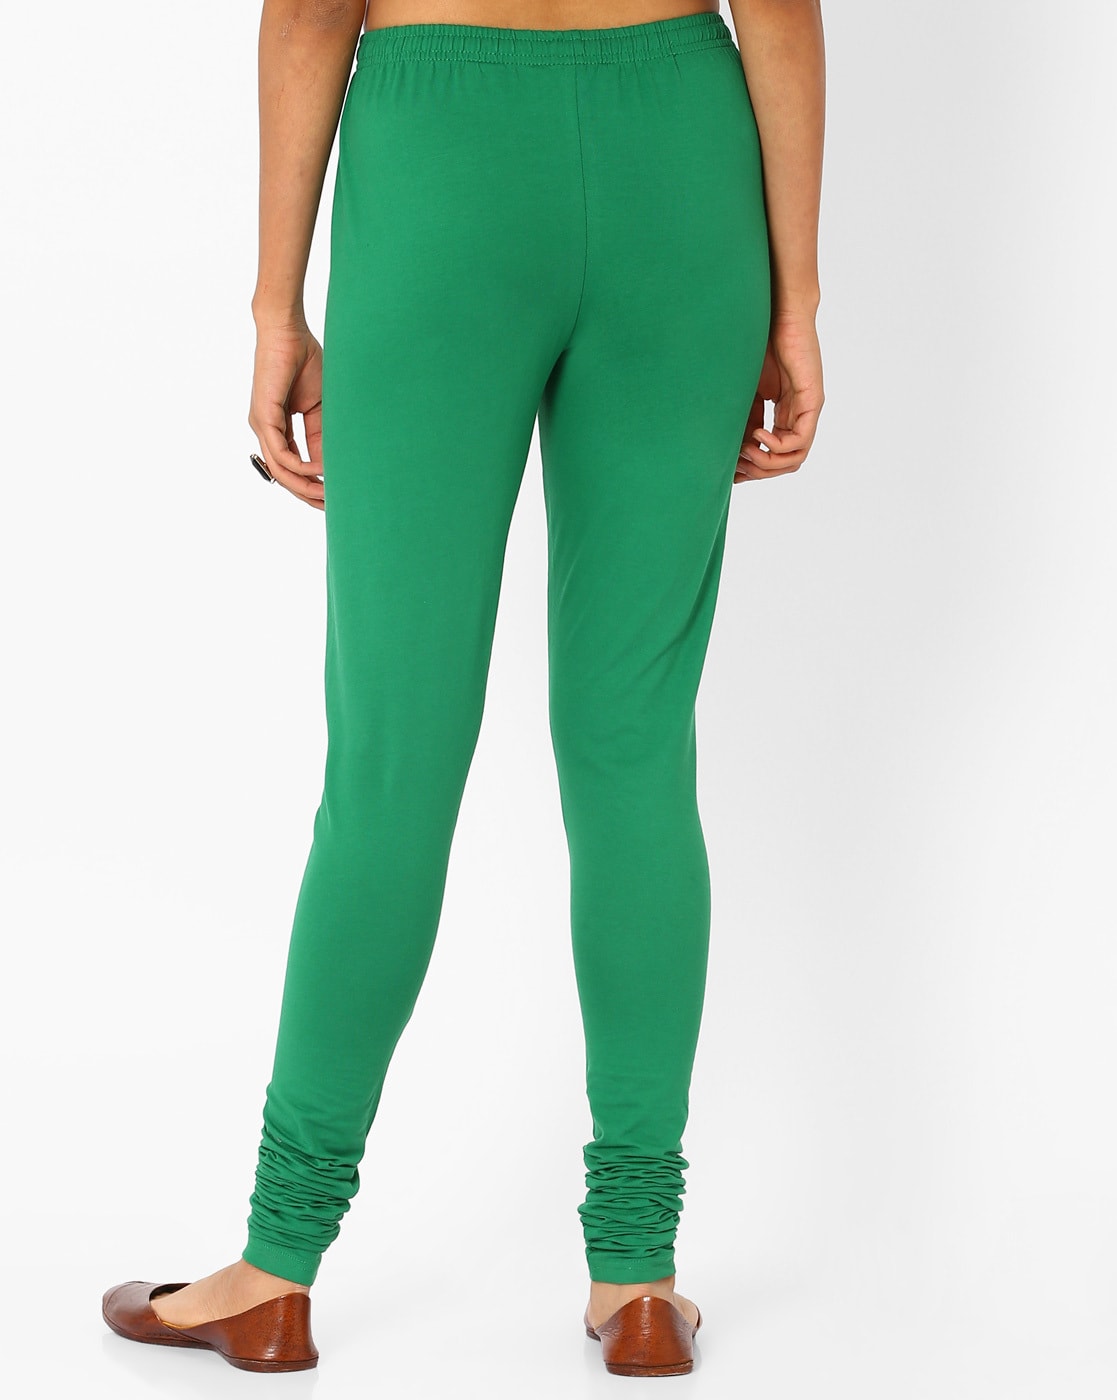 Prisma's Loungewear Capri in Lime Green and Light Blue